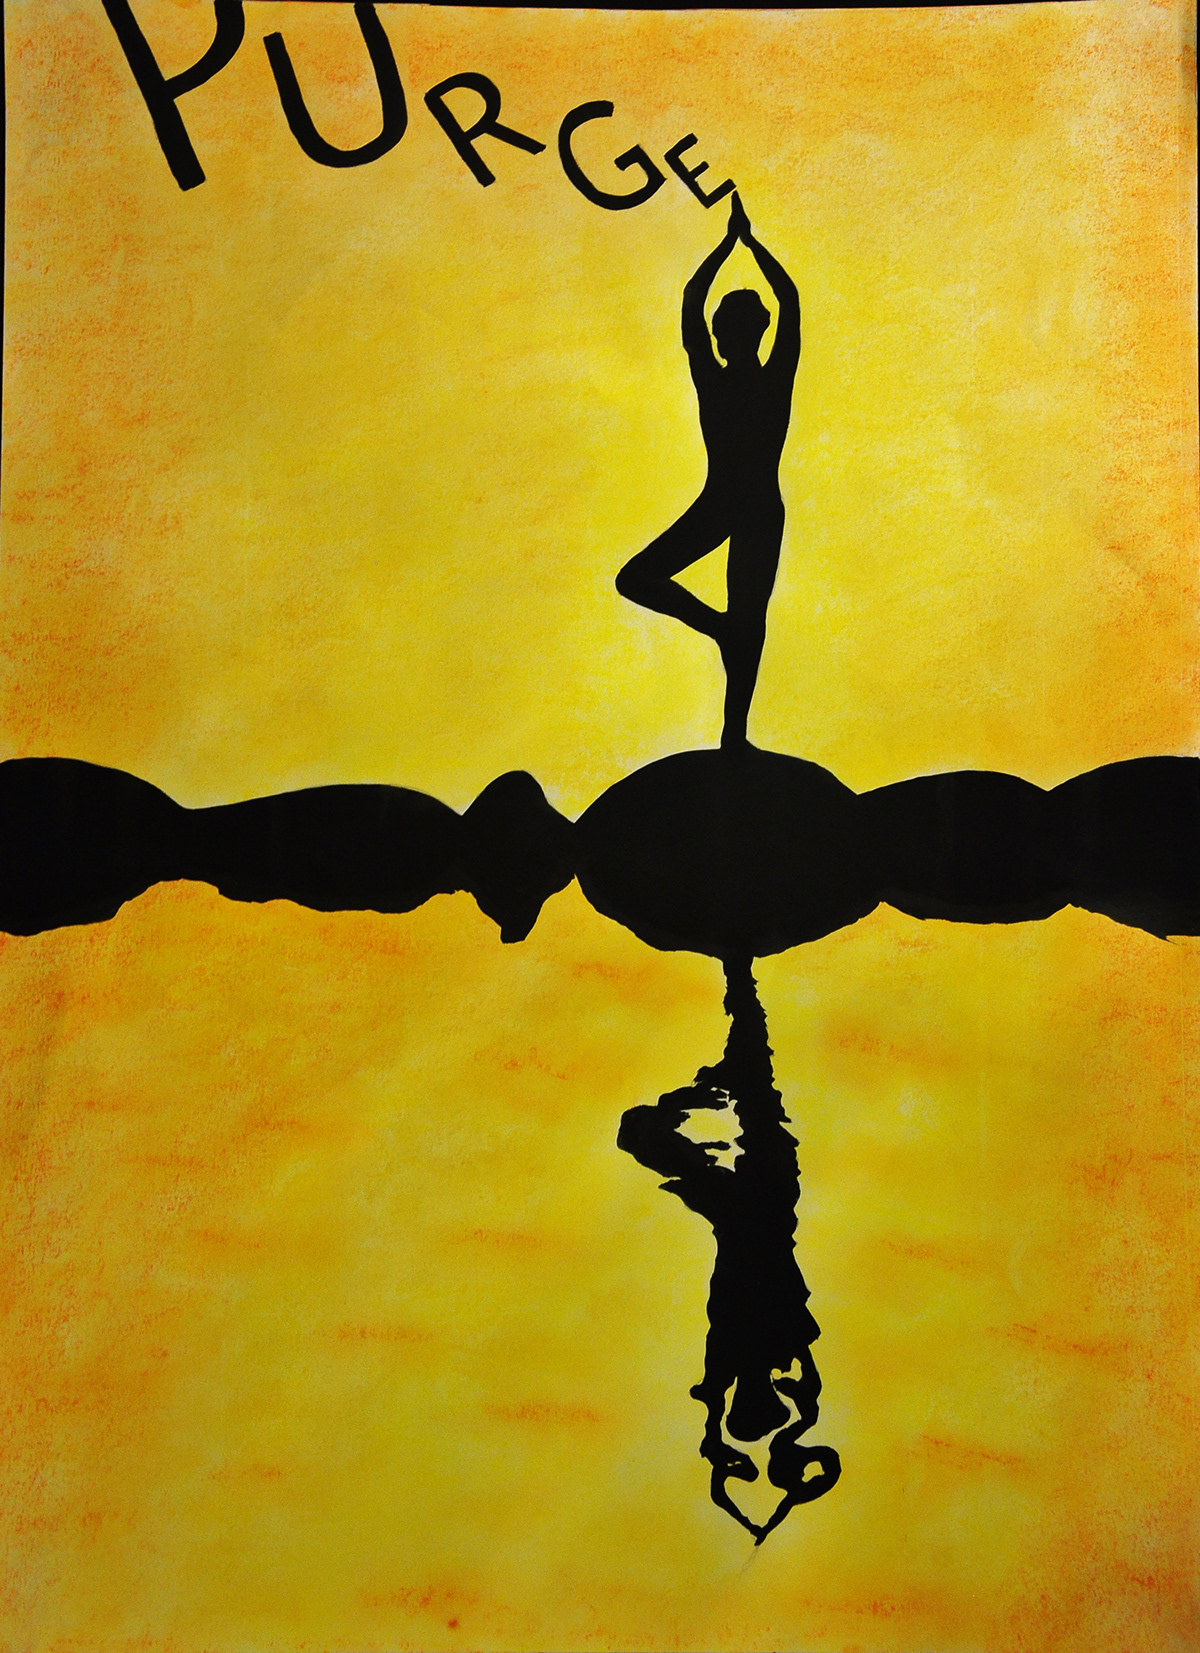 one word poster poster purge Yoga sunset Silhouette